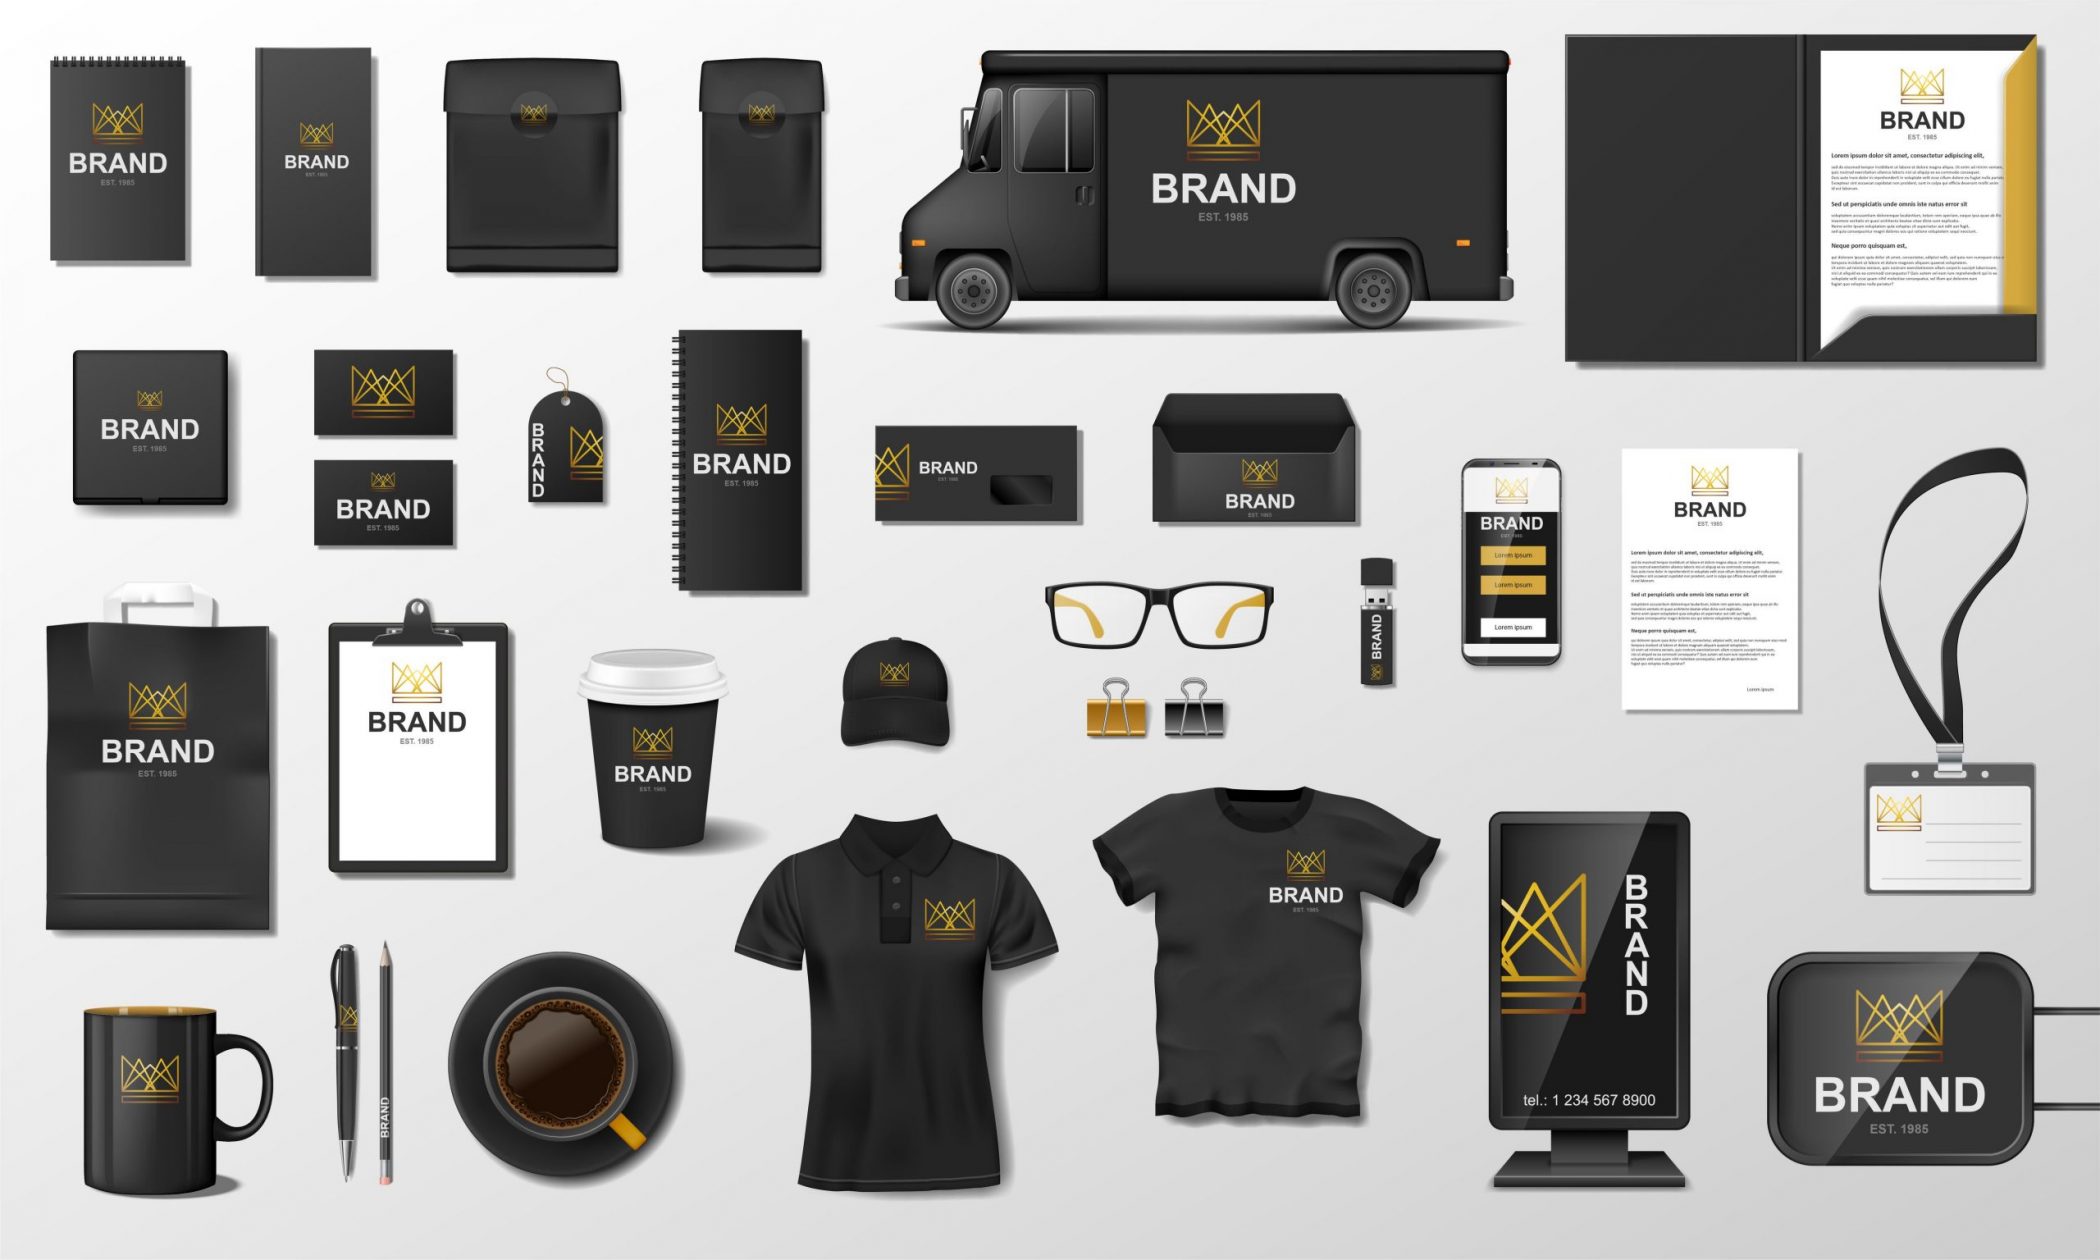 How To Develop a Strong Brand Identity - Blackbox Design